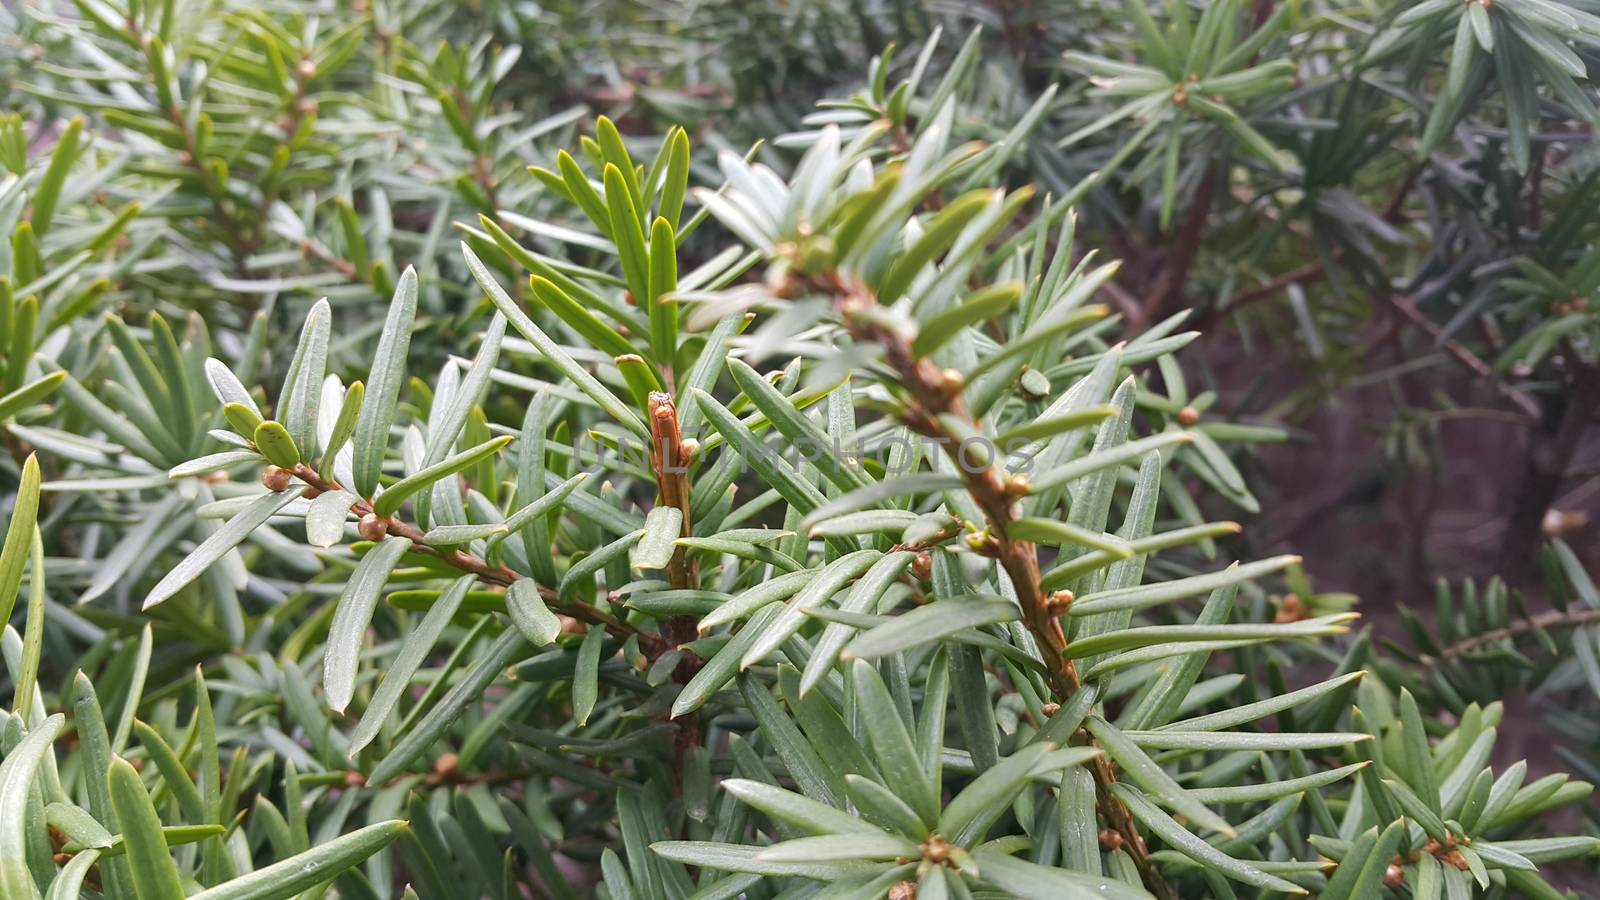 Green leaves of Taxus baccata, European yew which is conifer shrub with poisonous and bitter red ripened berry fruits.